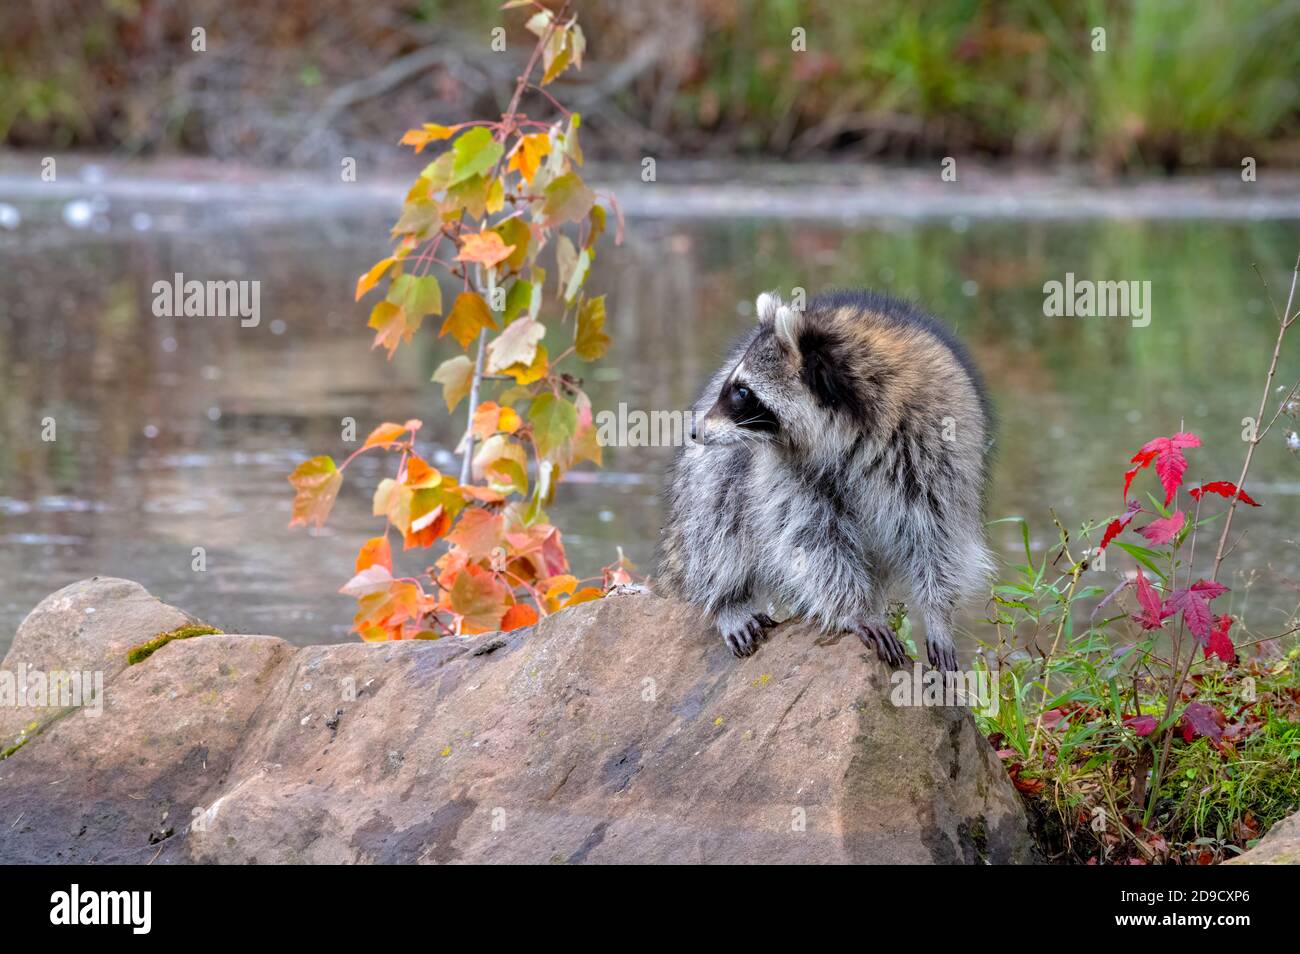 Raccoon stands on Boulder looking over the Water Stock Photo